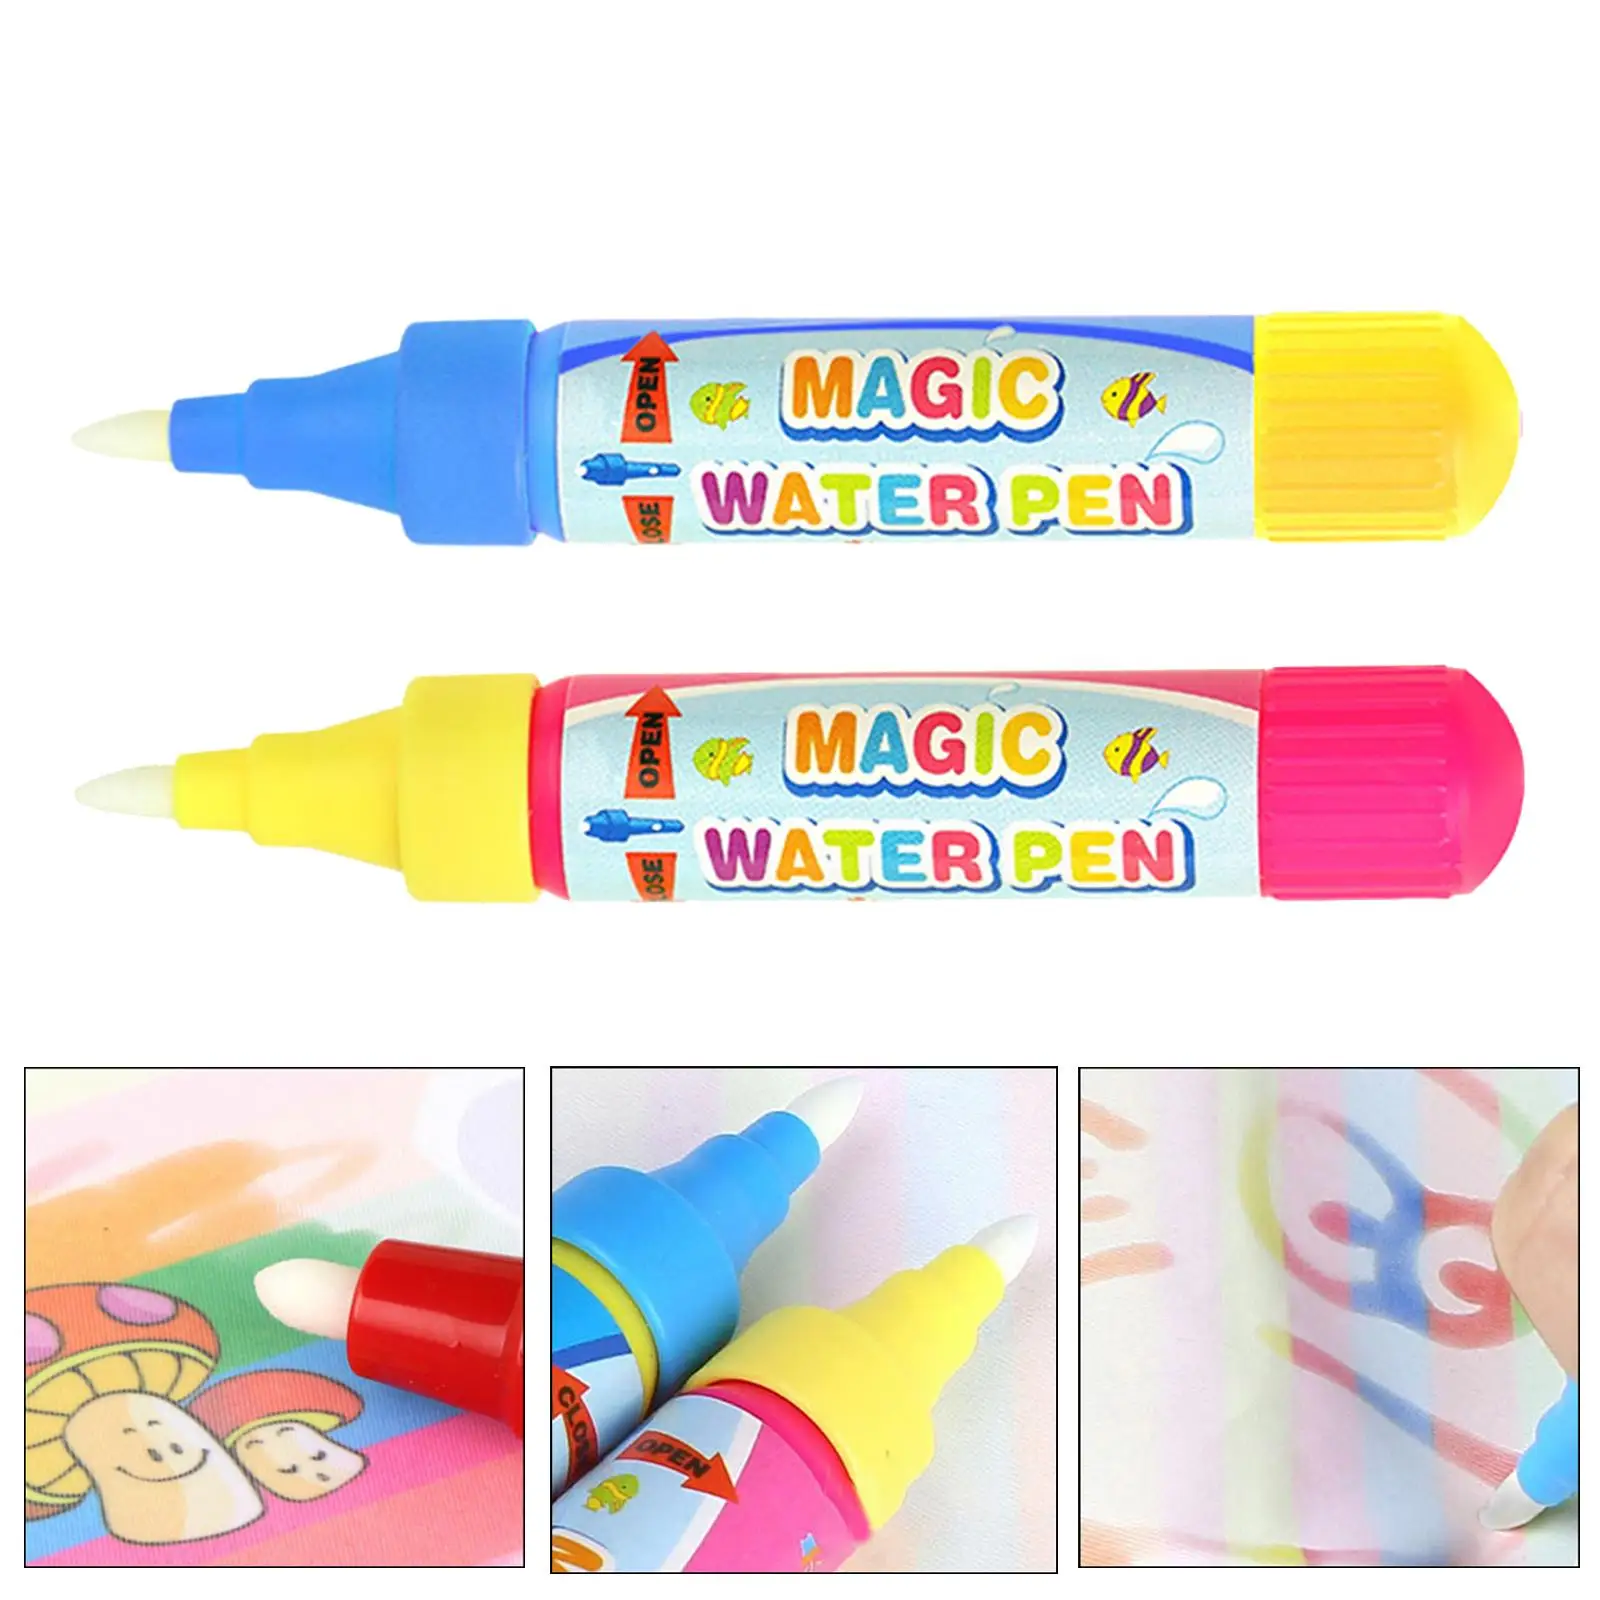 6 Pack Replacement Markers for Early Education Toys for Toddlers, Girls, Boys,